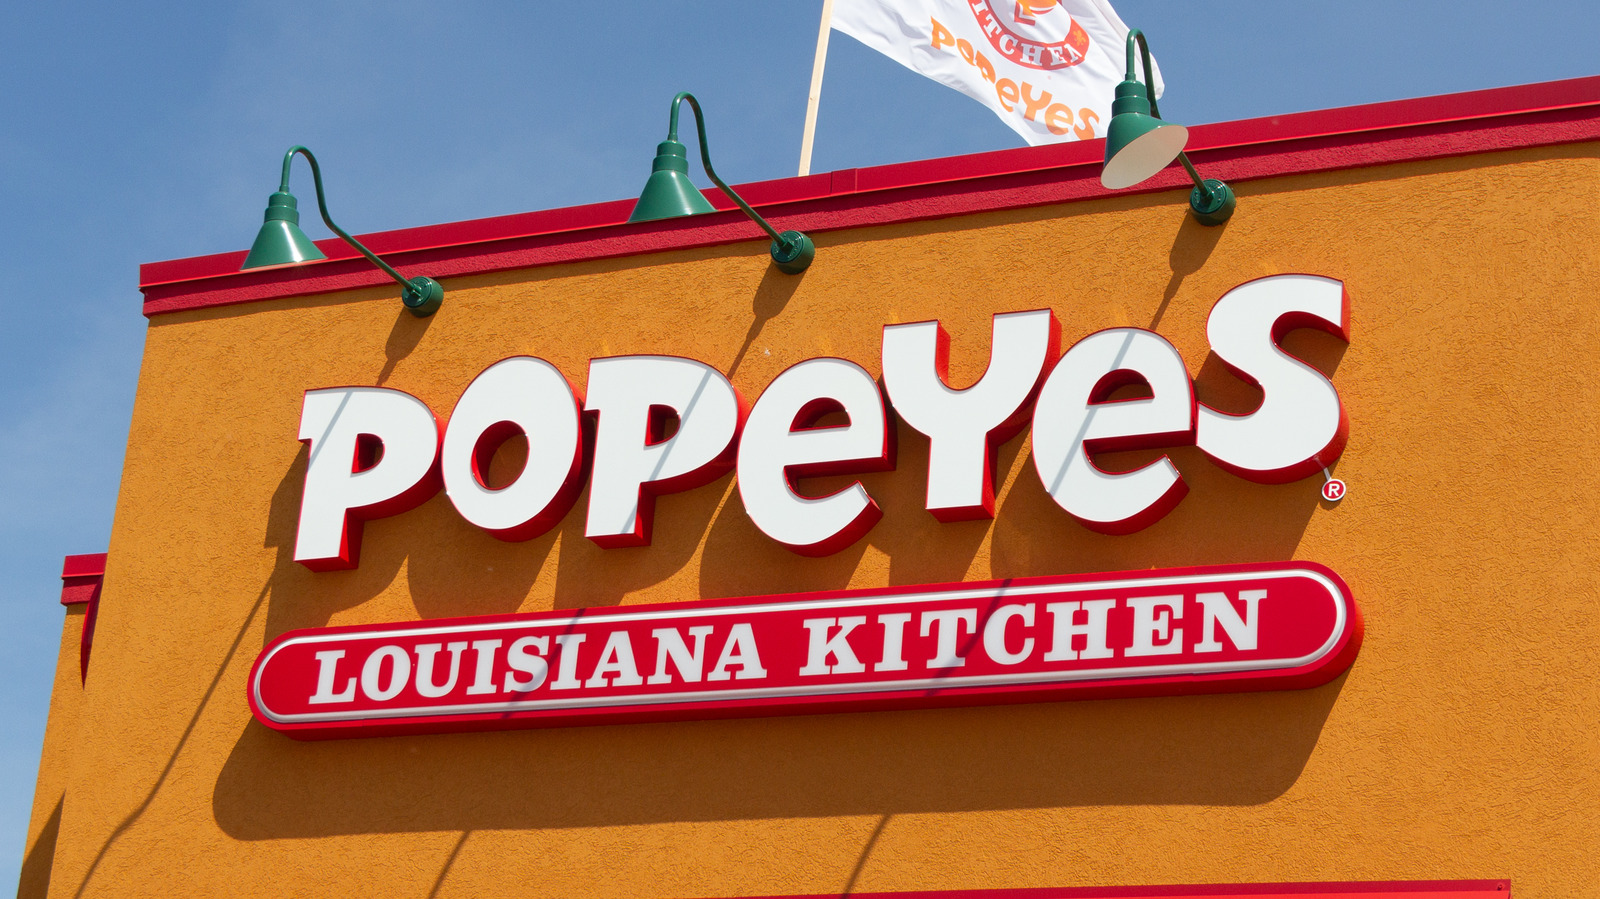 How The Popeyes Founder Inspired A Local Christmas Tradition